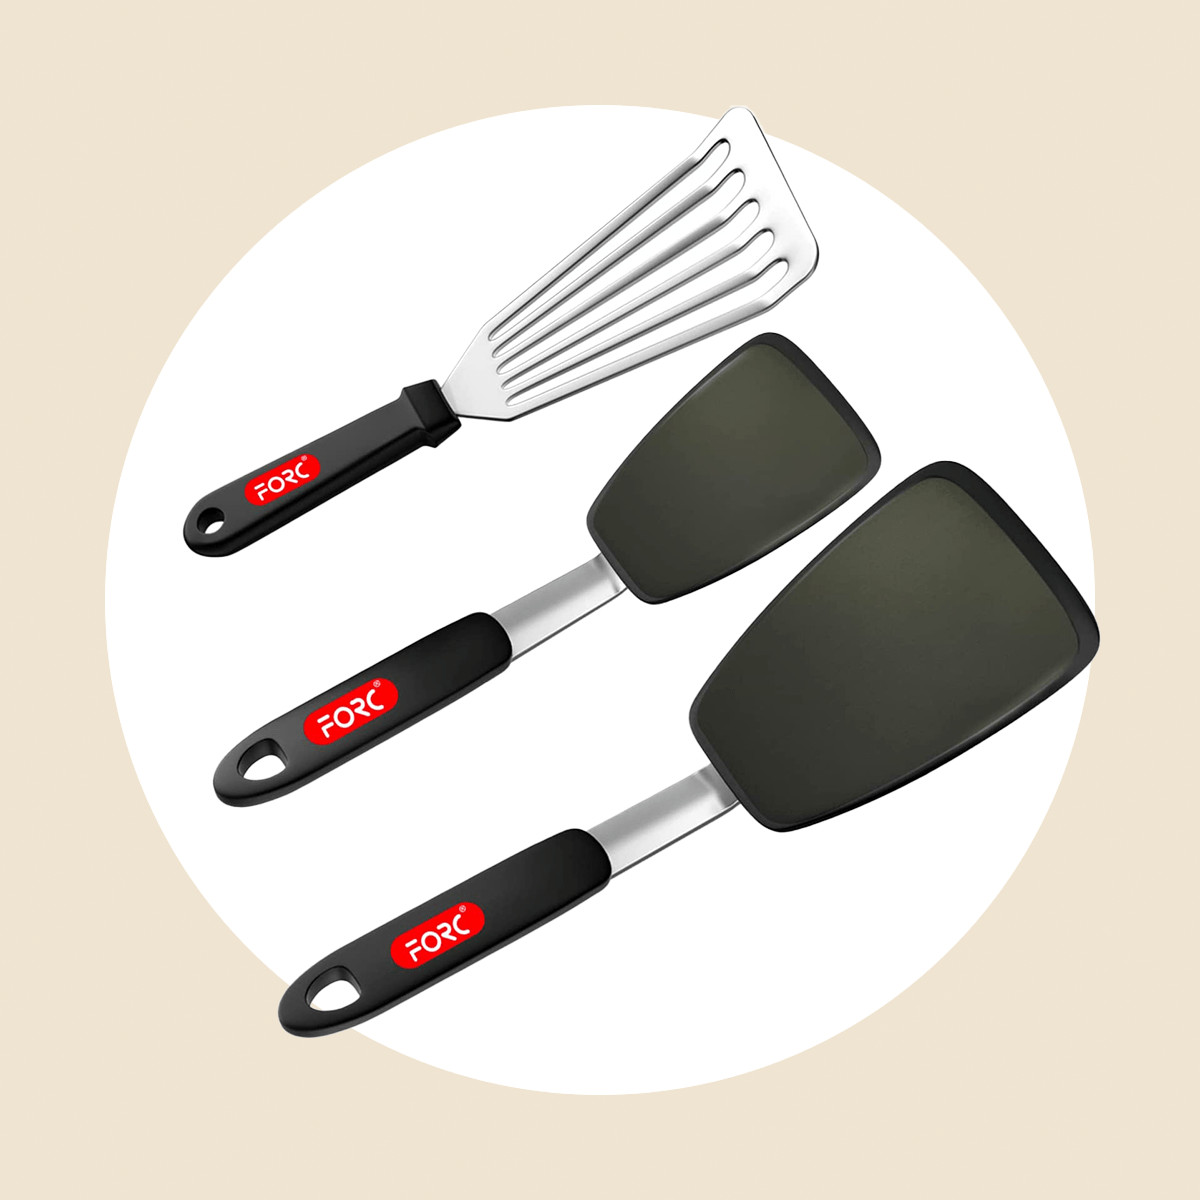 https://www.tasteofhome.com/wp-content/uploads/2022/11/silicone-spatula-forc-3-pack-ecomm-via-amazon.com_.png?fit=700%2C700